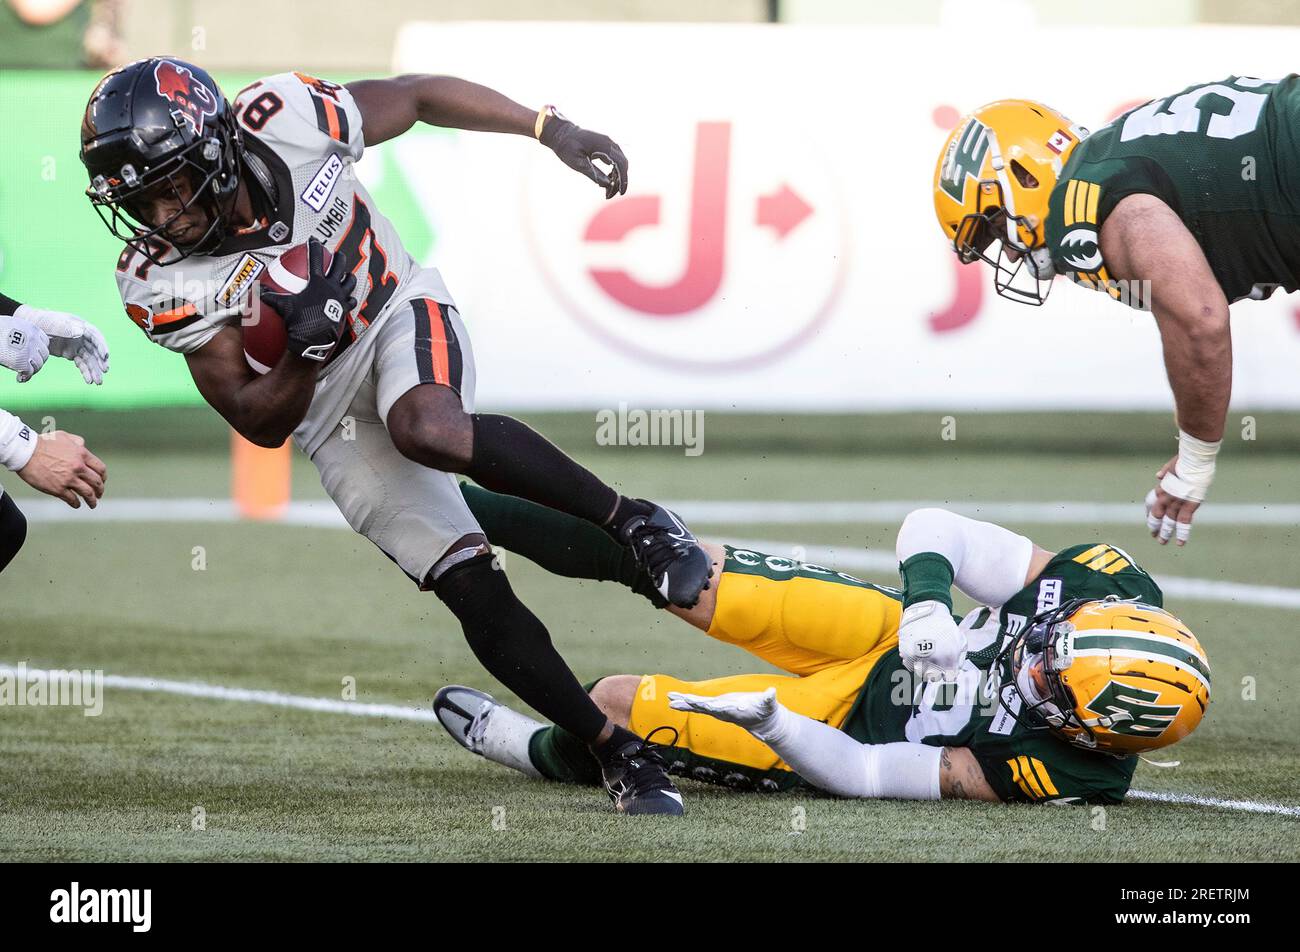 B.C. Lions' Terry Williams (87) slips a tackle from Edmonton Elks